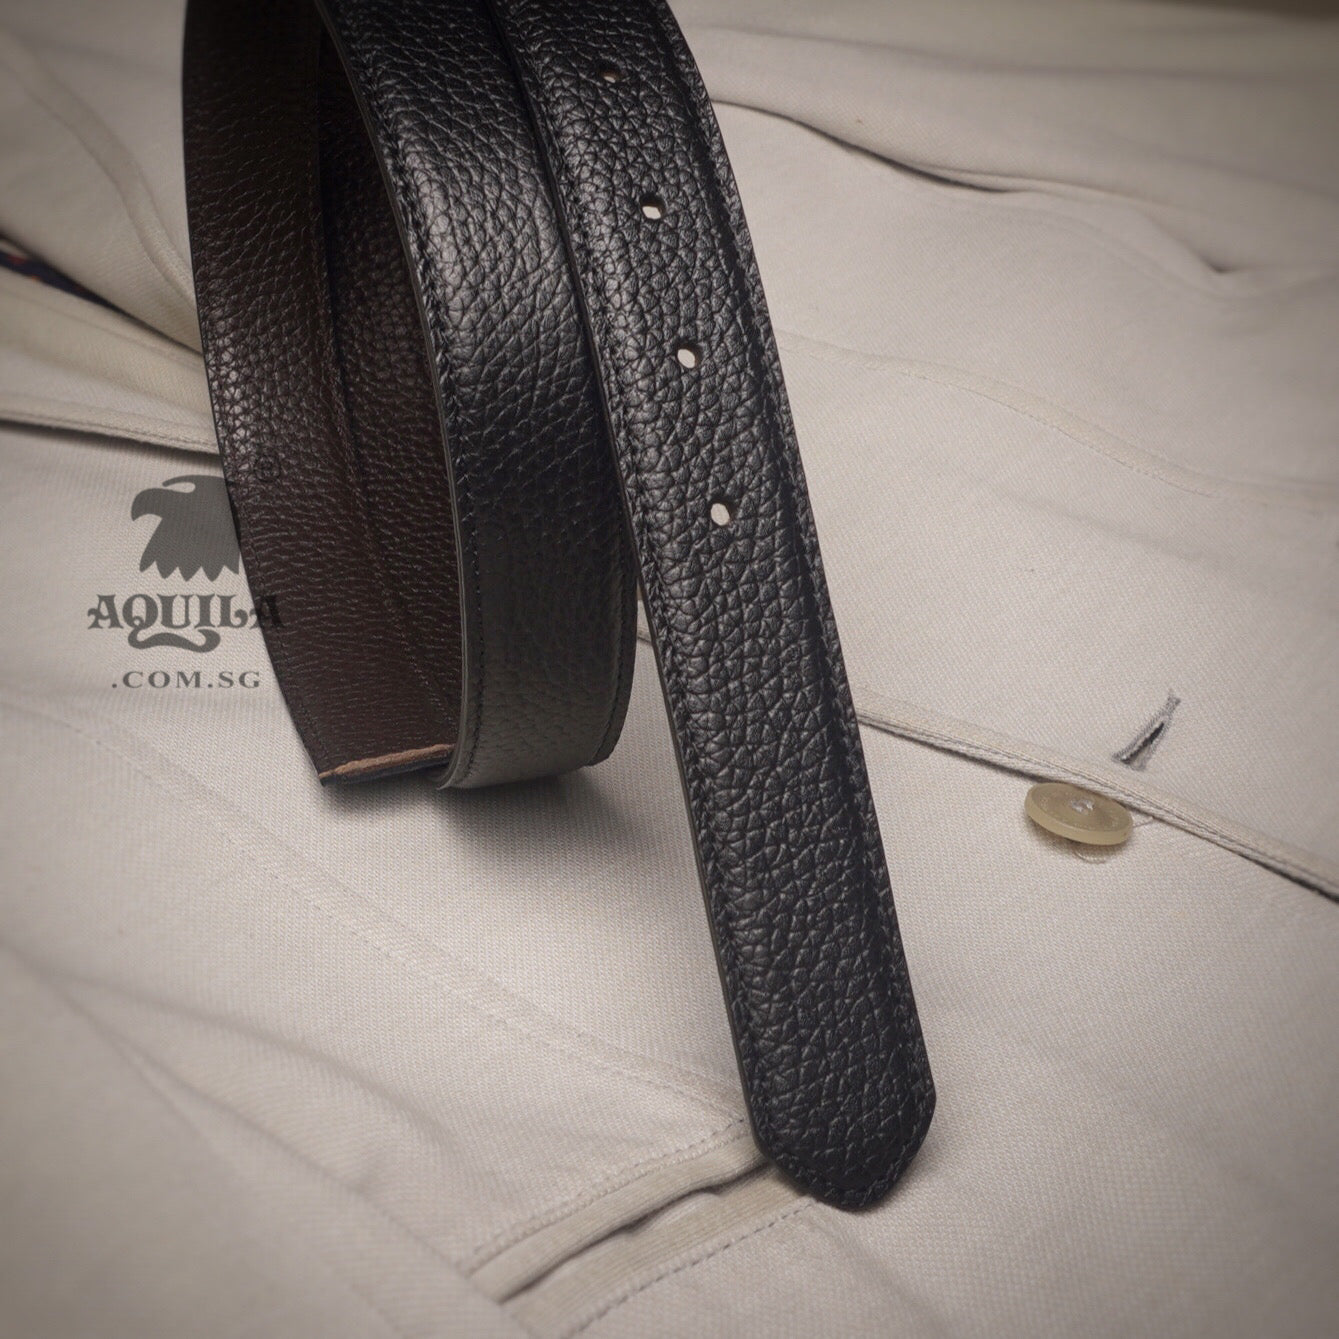 Aquila pebbled leather replacement belt straps (for clip buckles)